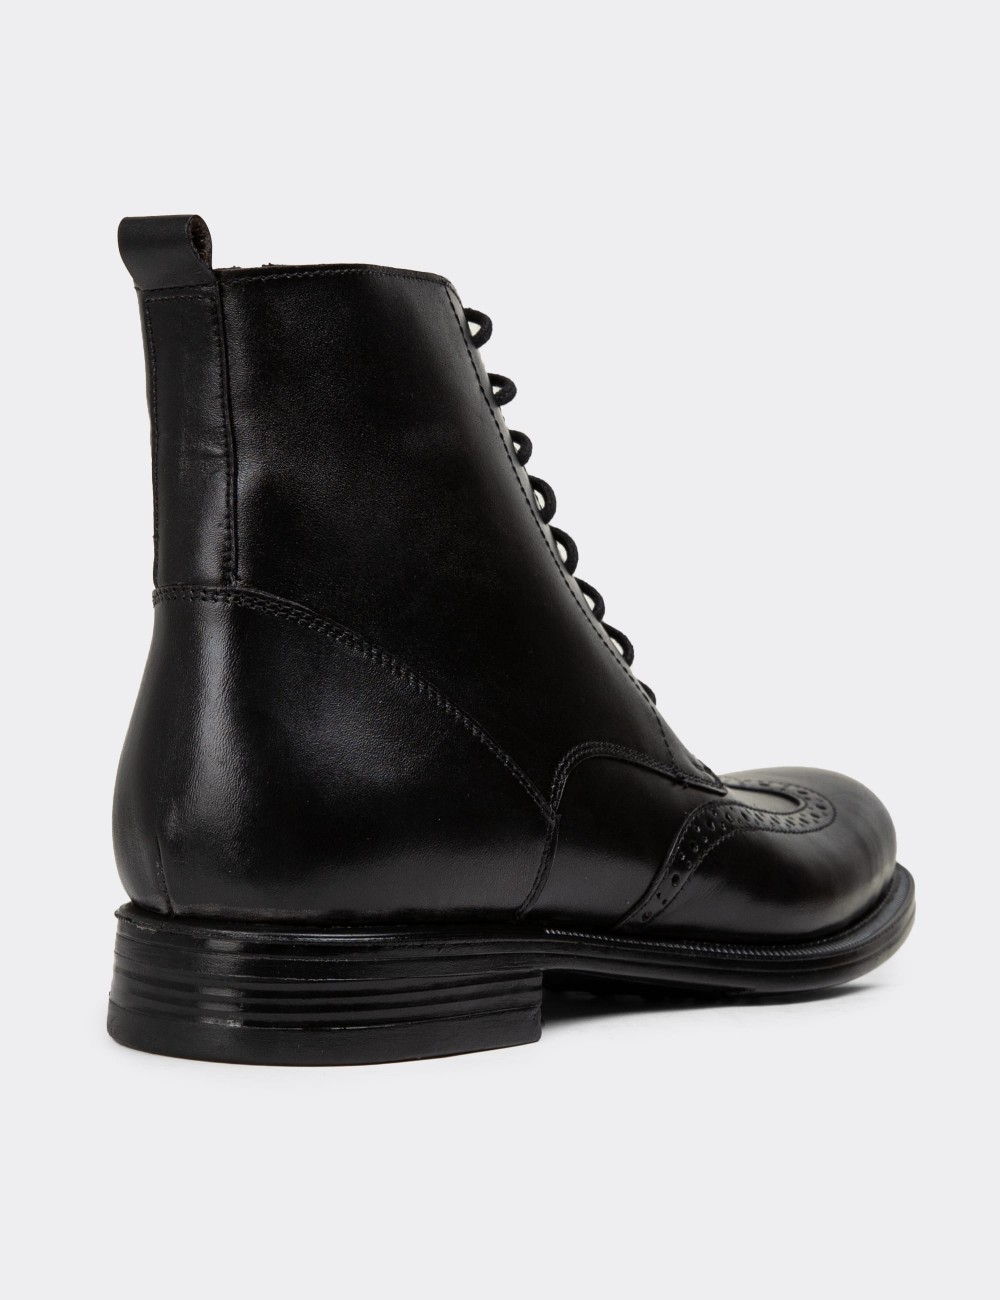 Anthracite Leather Boots - 01973MANTC01